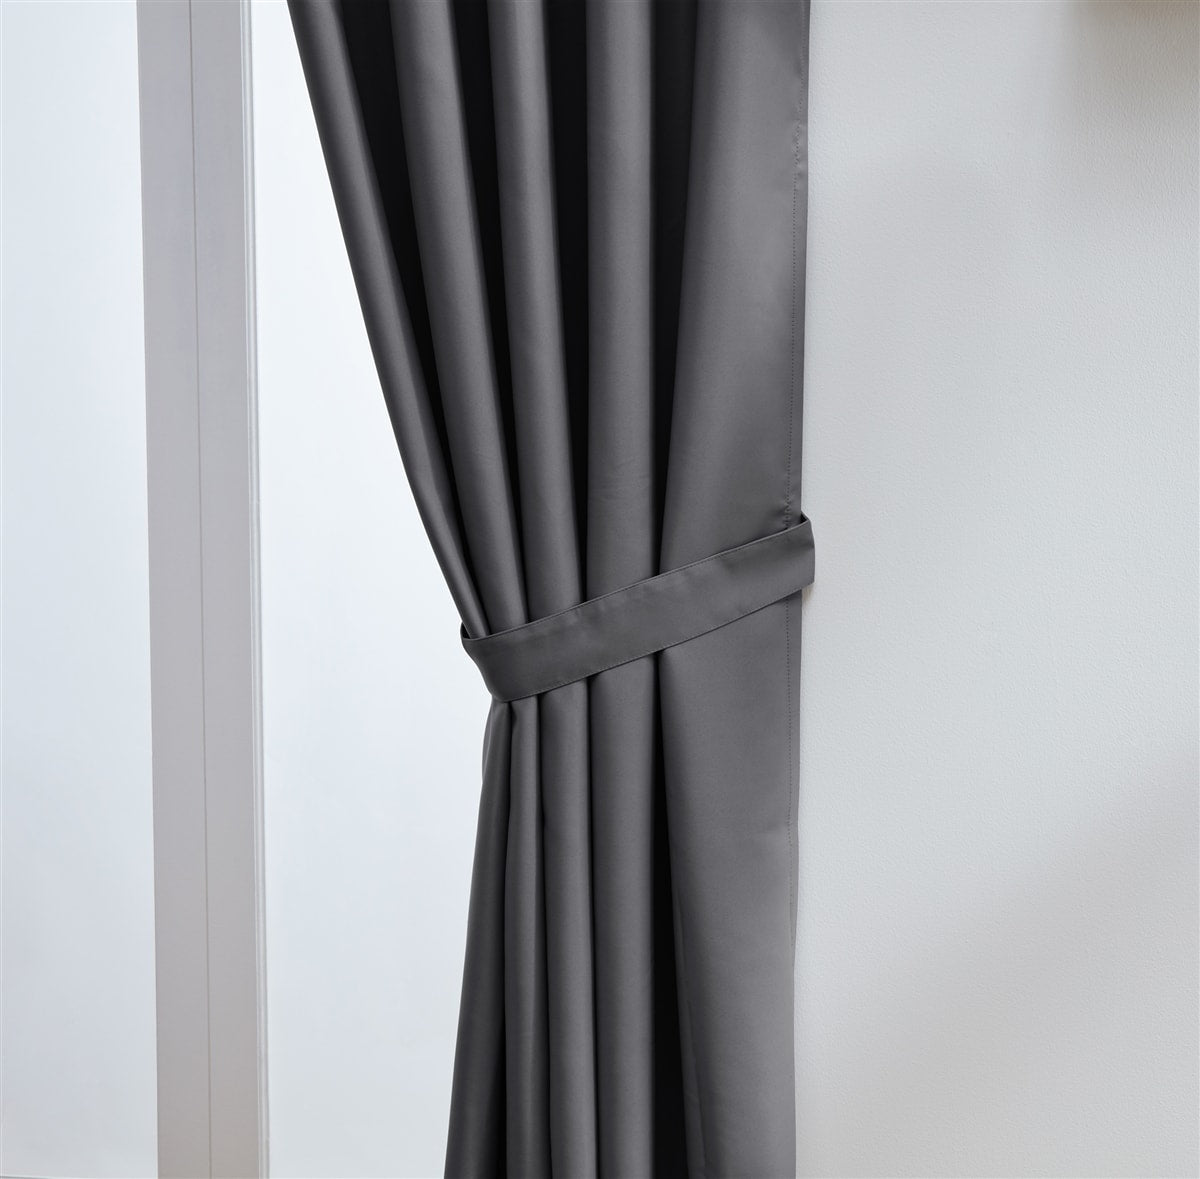 Thermal Blackout Ready Made Eyelet Curtains + Tie Backs (Grey)